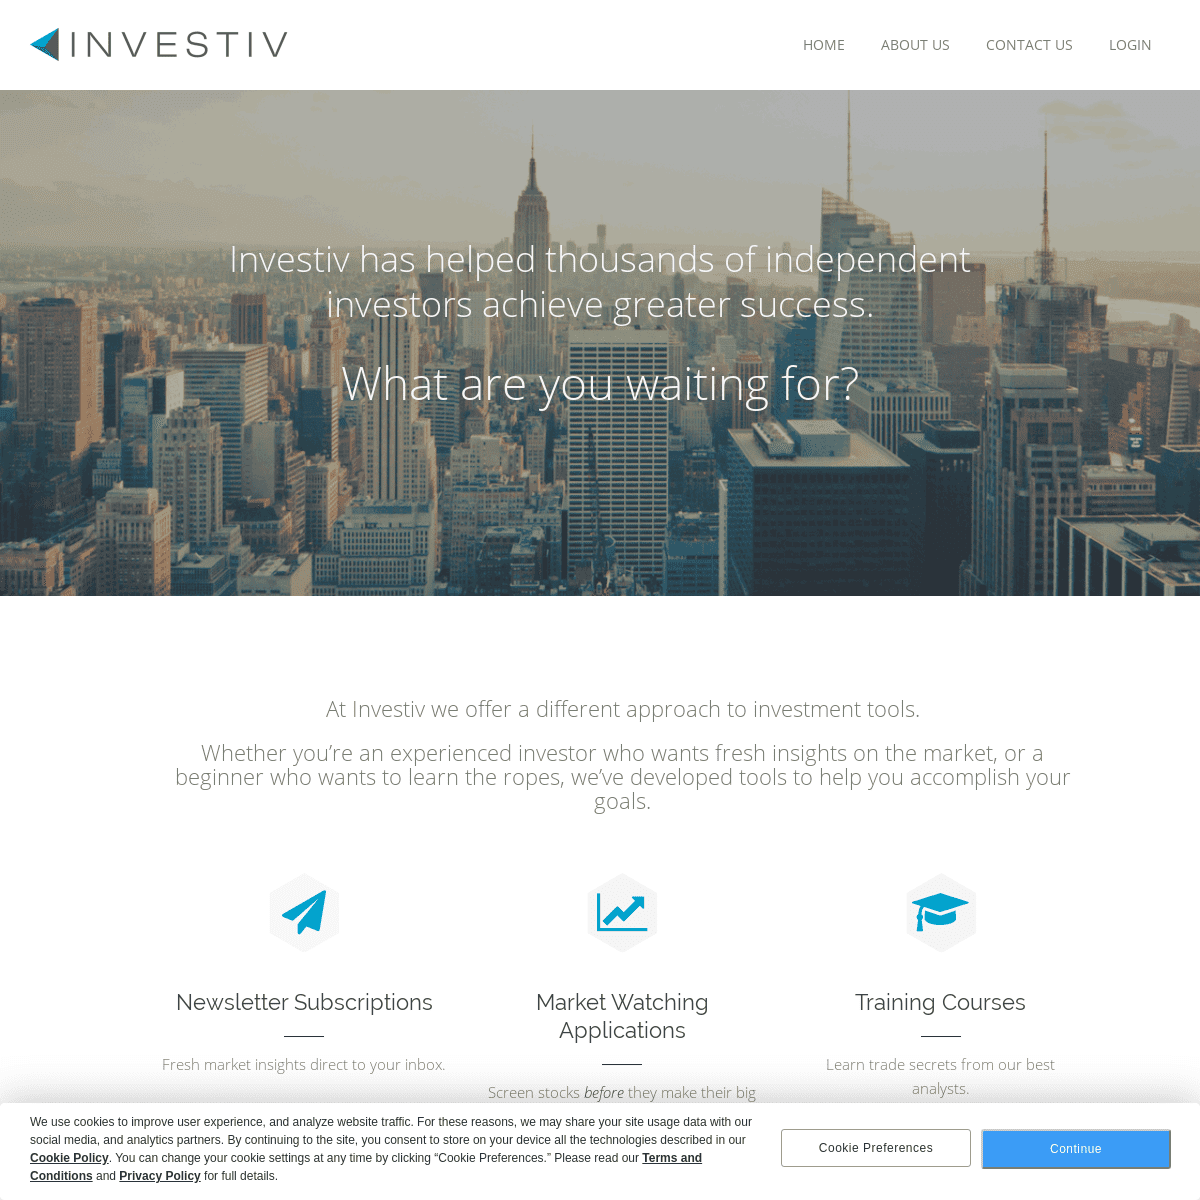 A complete backup of investiv.co